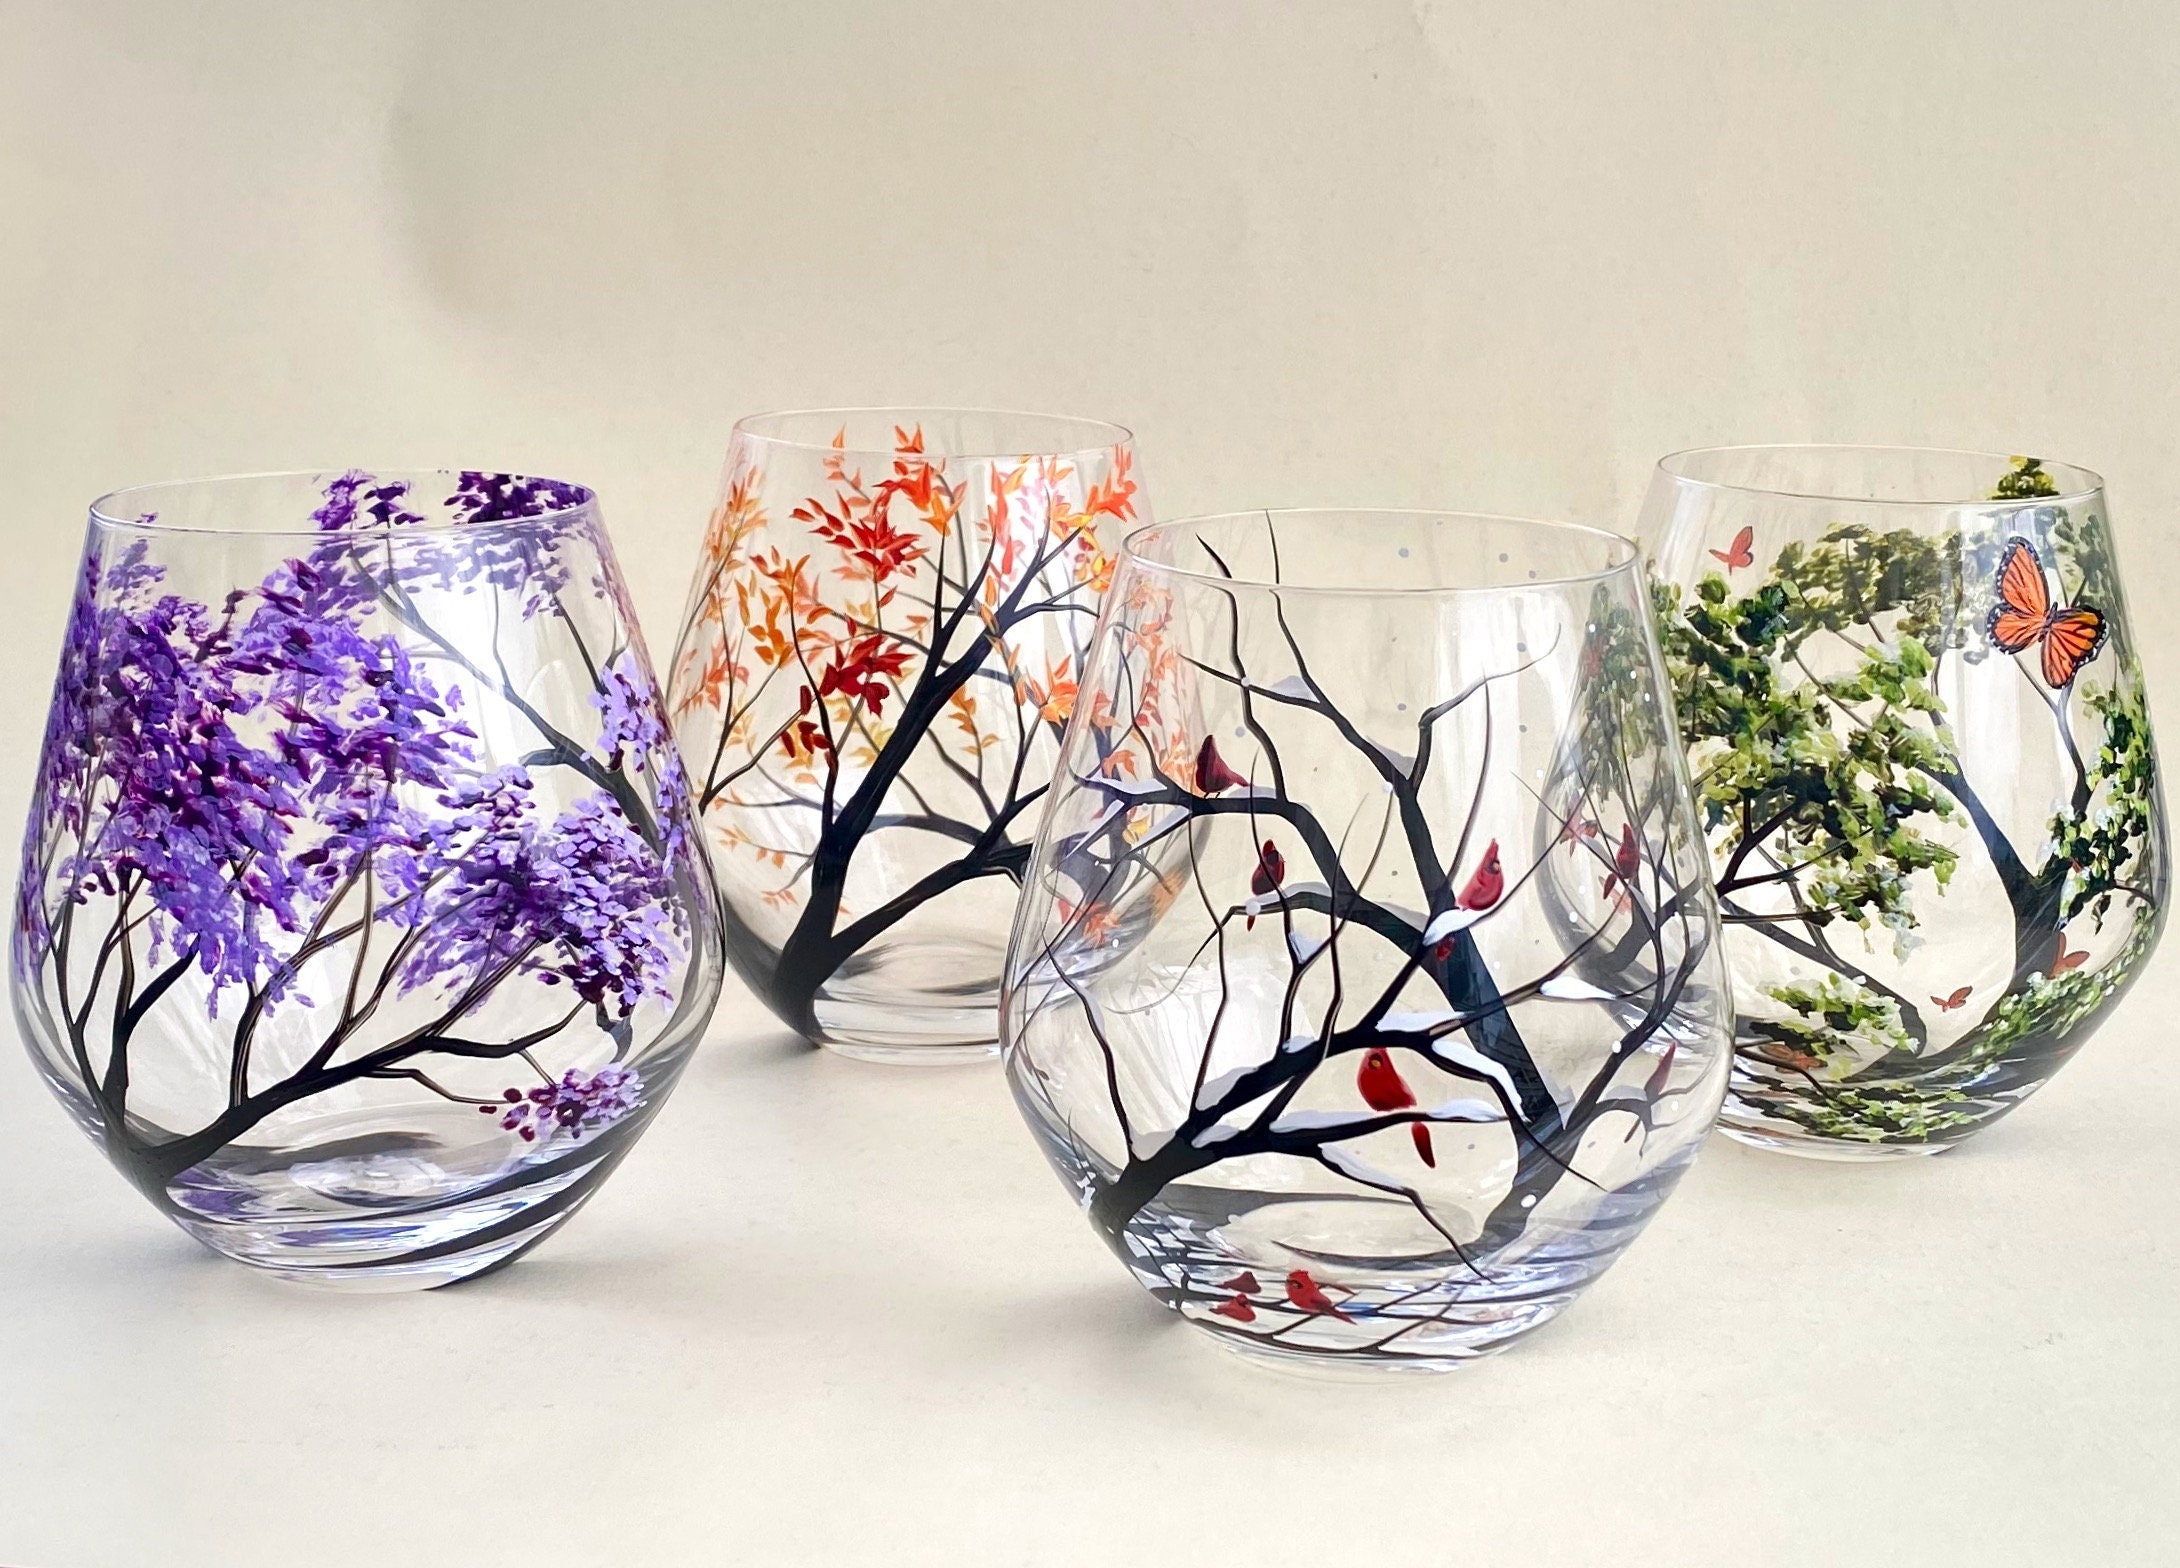 GKWW 4pcs Hand Painted Wine Glass Four Seasons Tree Wine Glasses Fall Leaves Flower Seasons Colored Wine Glasses for Wine Cocktails Novelty Gift for